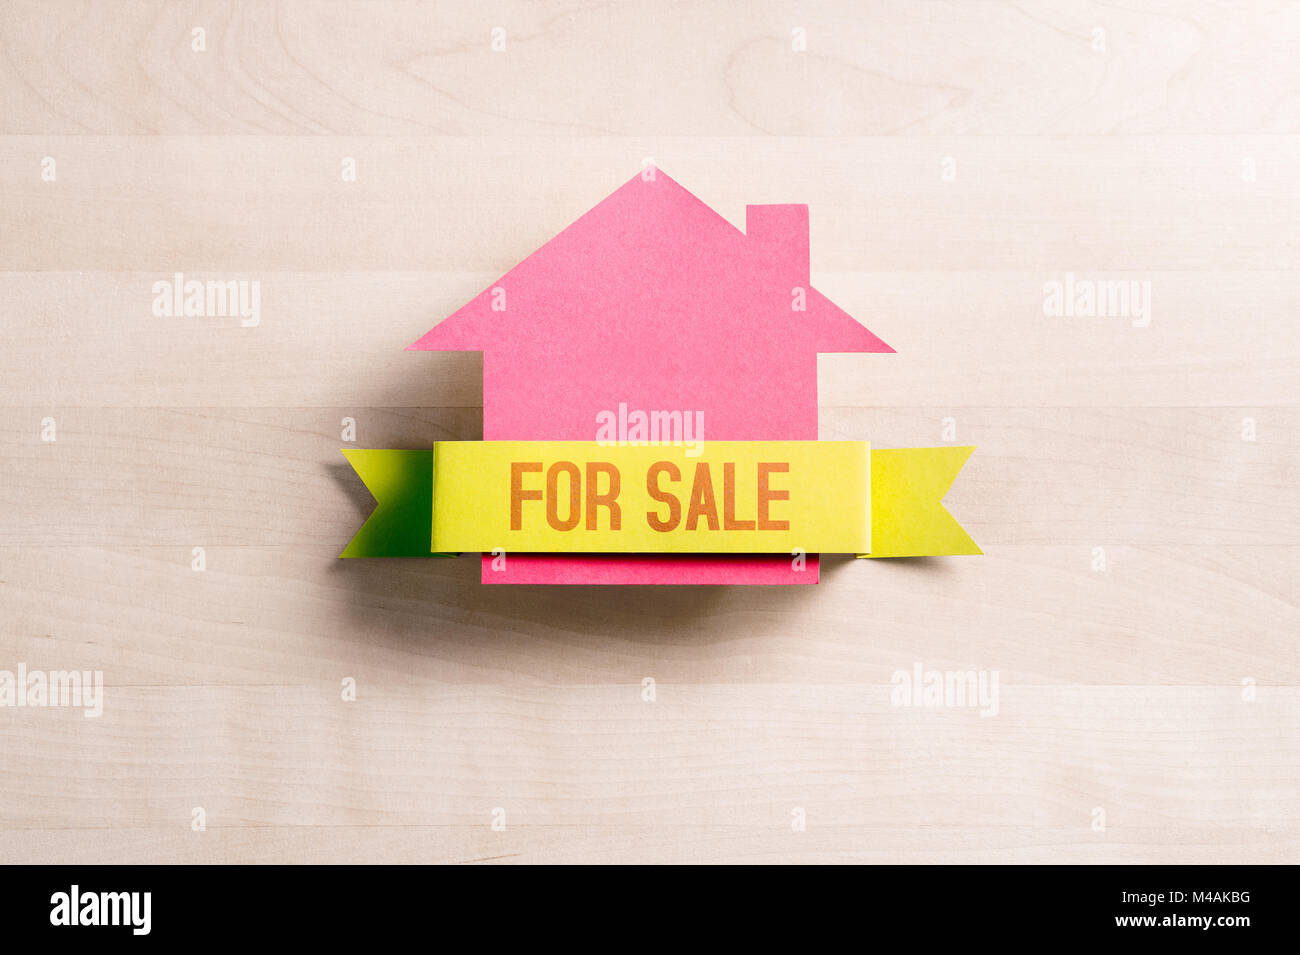 House for sale. Real estate business concept. Selling and buying home. Cottage made from cardboard paper on wooden table. Stock Photo